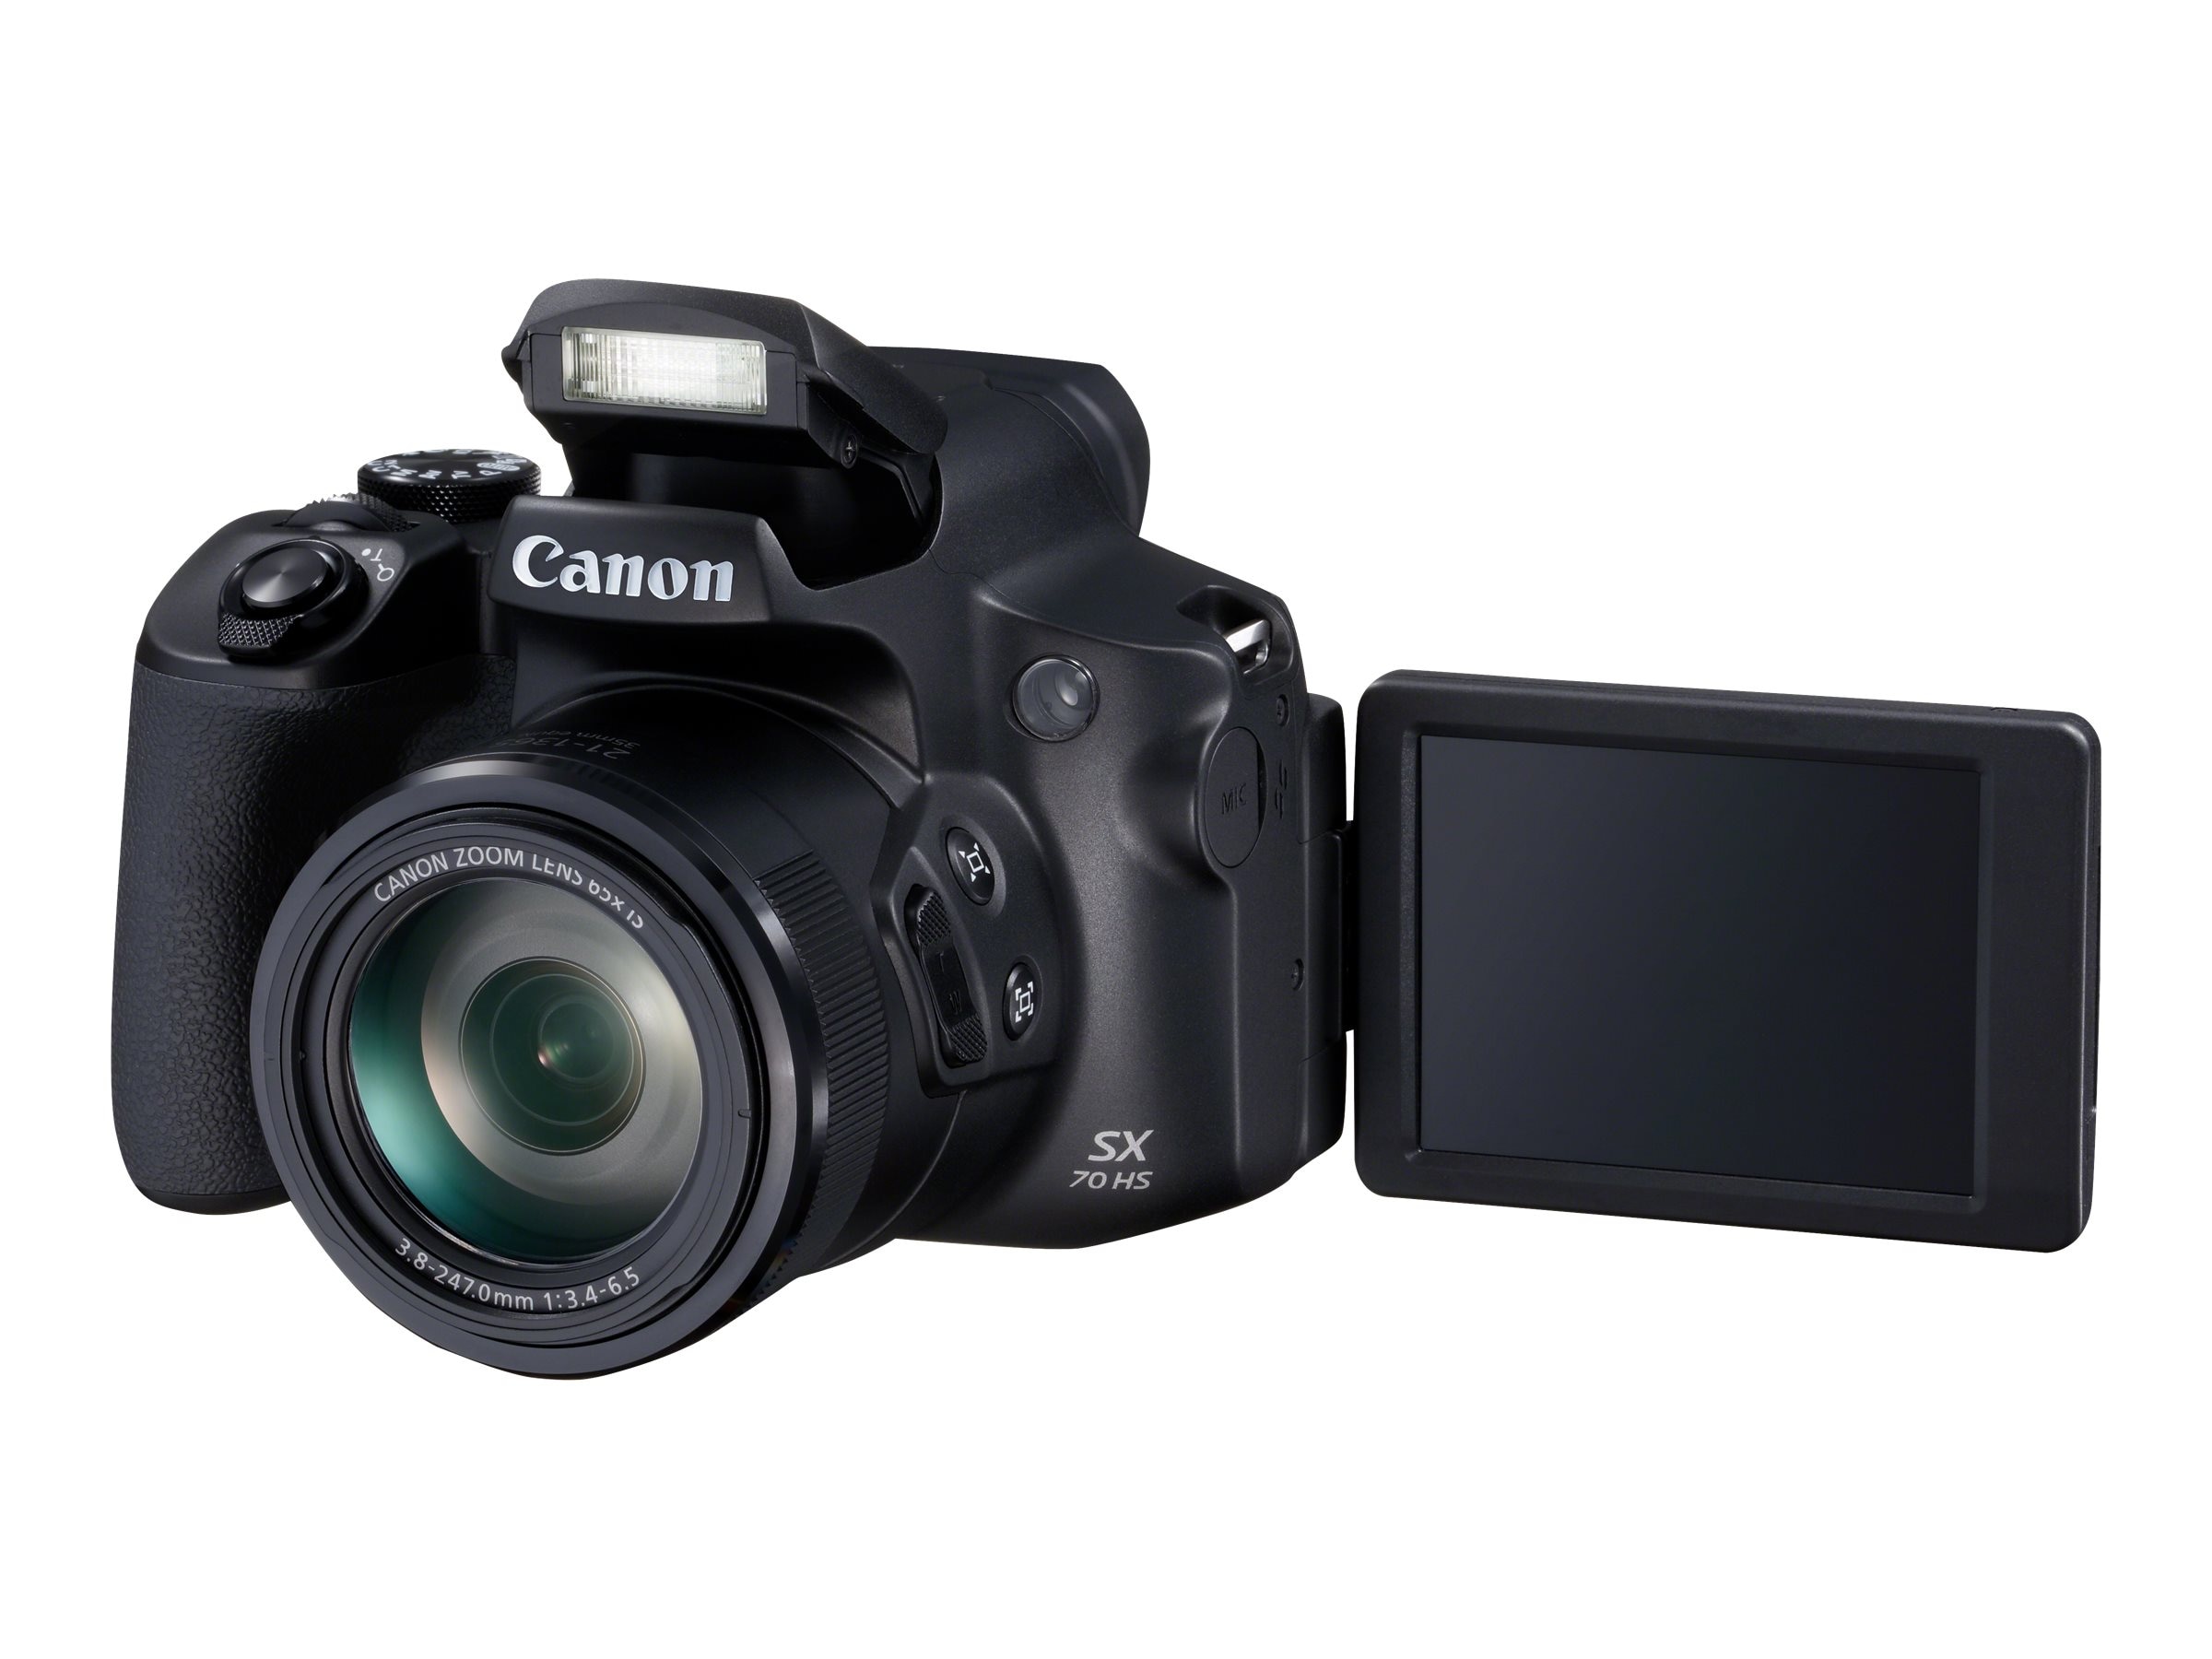 Buy Canon Canon PowerShot SX70 HS Digital Camera at Connection